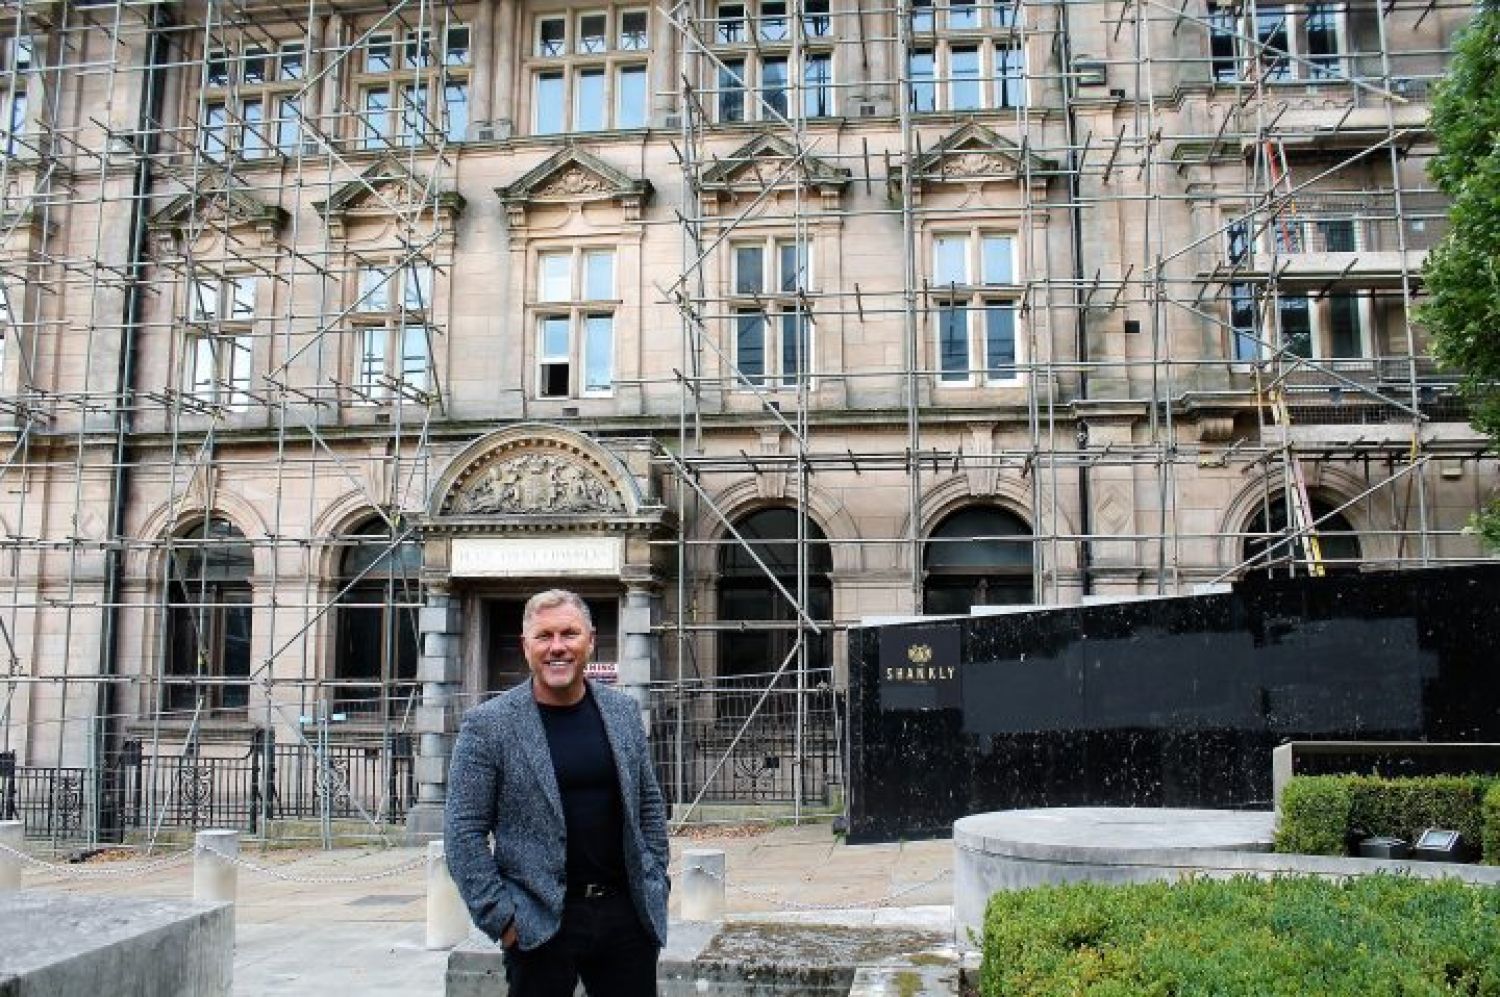 Preston's old post office becomes focus of new innovative hotel